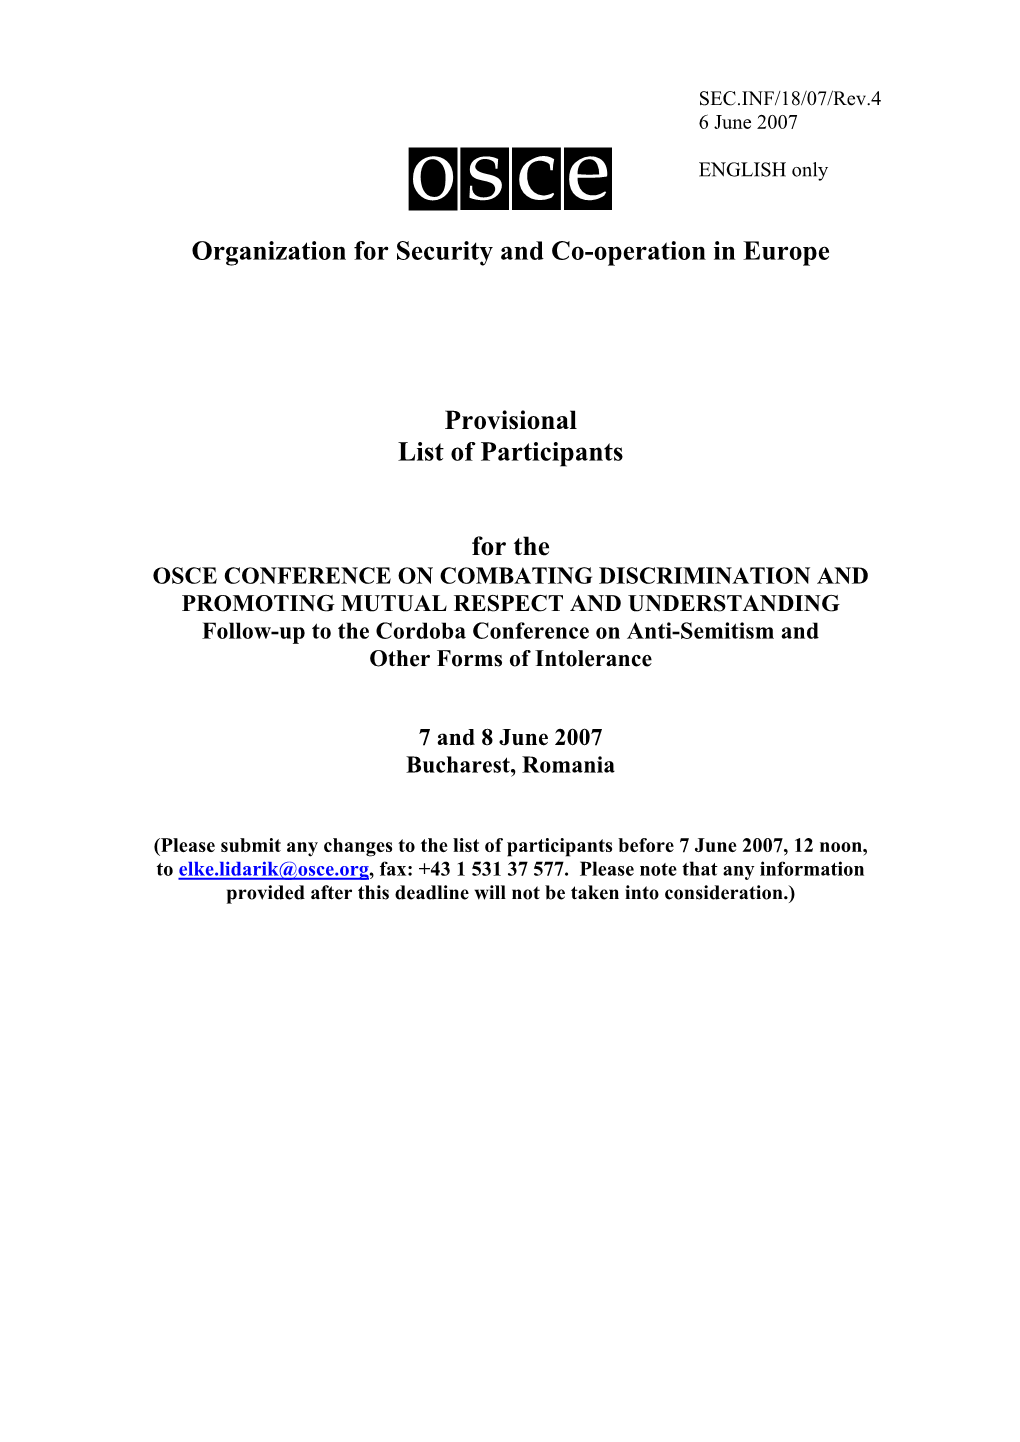 Organization for Security and Co-Operation in Europe Provisional